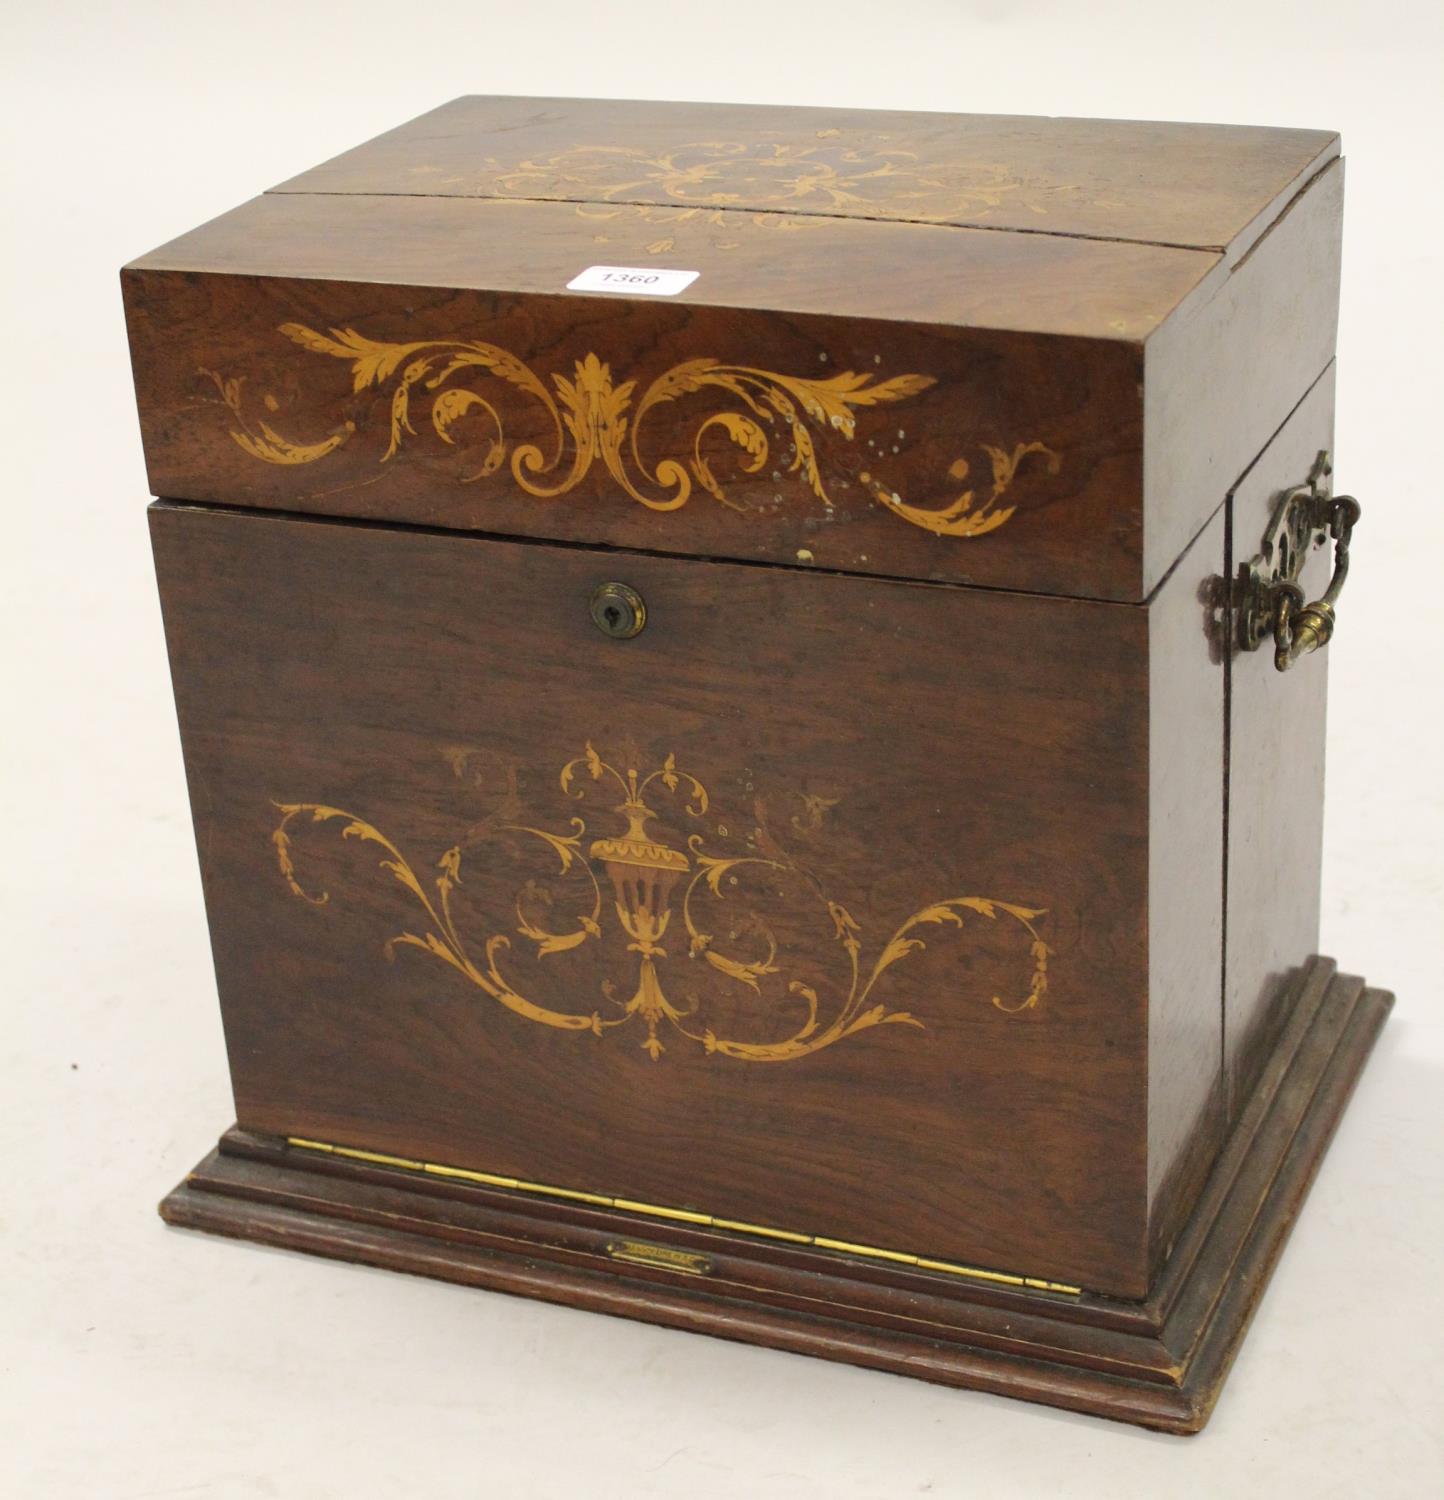 19th Century rosewood floral and urn inlaid decanter / games box having hinged cover, with